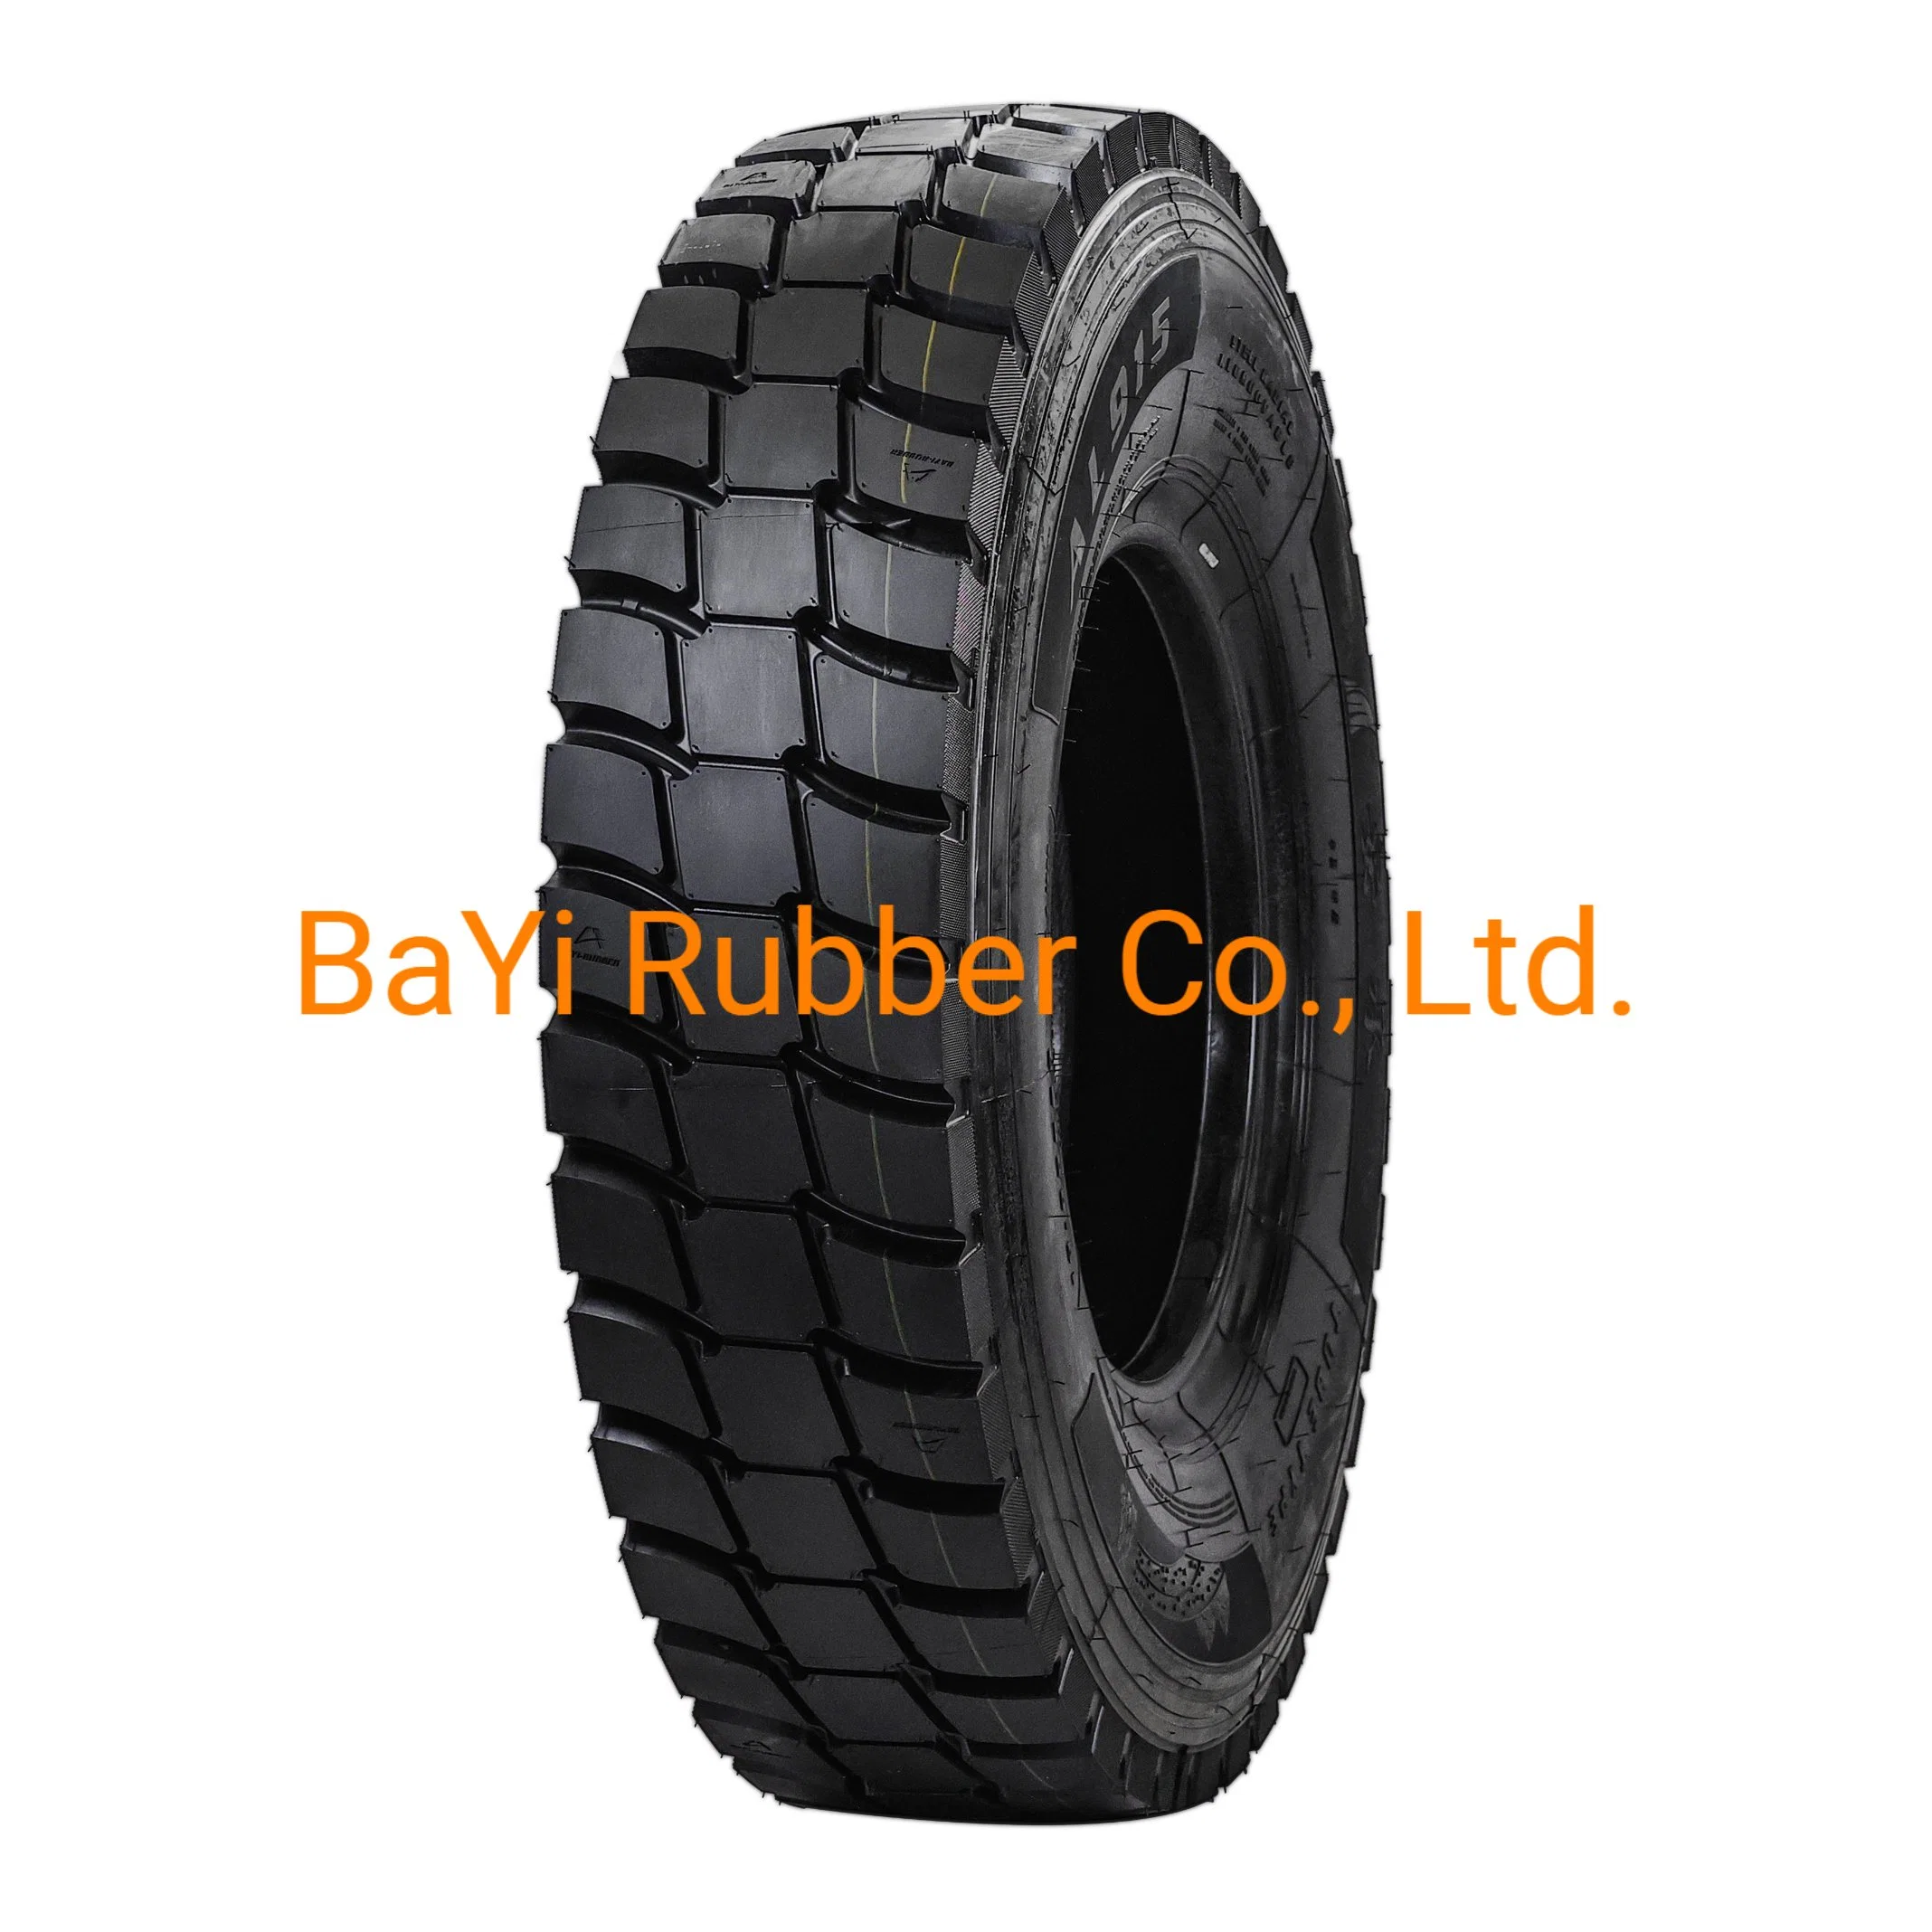 Bayi Rubber Ansu Wonderland New Tyre Better Price High-Performance Tyre Fuel Efficient Tires